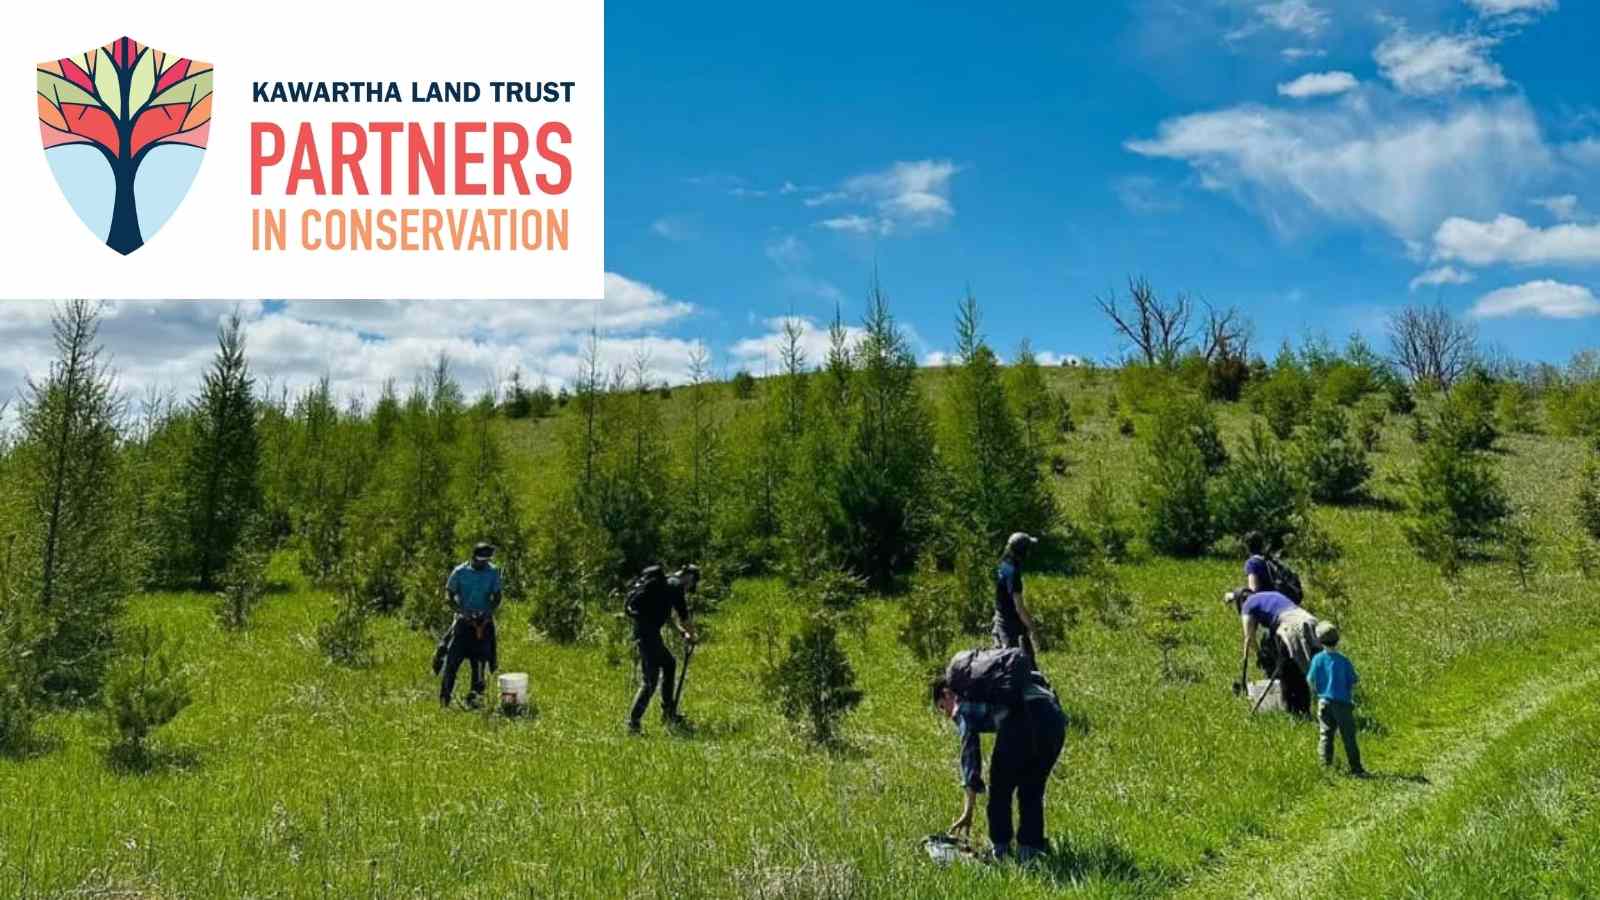 Kawartha Land Trust Partners in Conservation Logo. Photo of people planting trees.